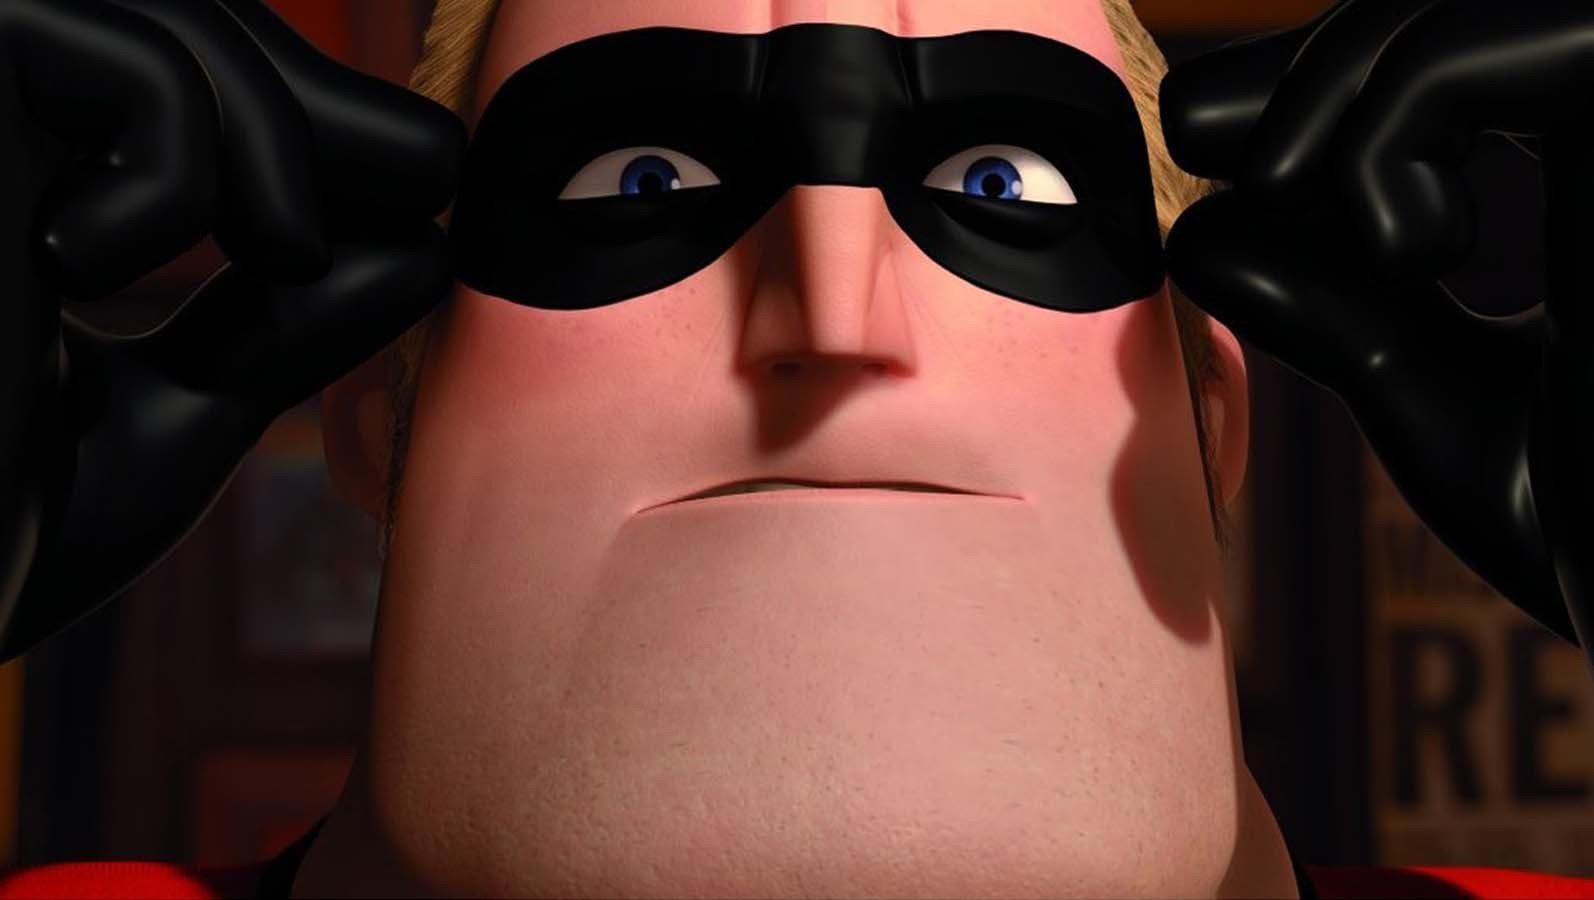 The Incredibles Wallpaper And Background - Jk Rowling Meme Harry Potter Canon , HD Wallpaper & Backgrounds